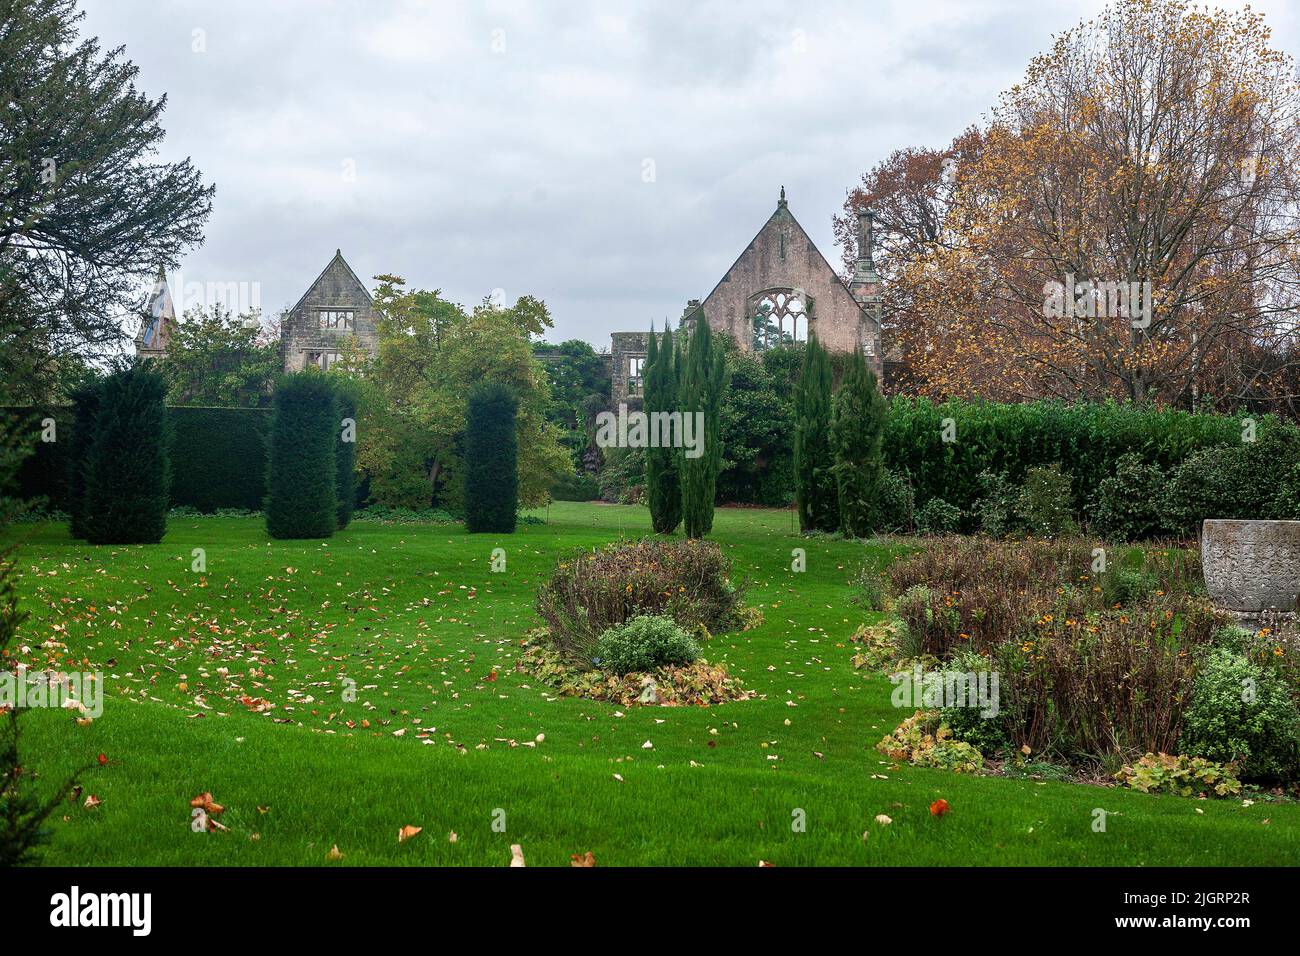 Nymans, West Sussex, UK: sunken garden and ruins of the house, damaged by fire in 1947, and left as a romantic monument Stock Photo